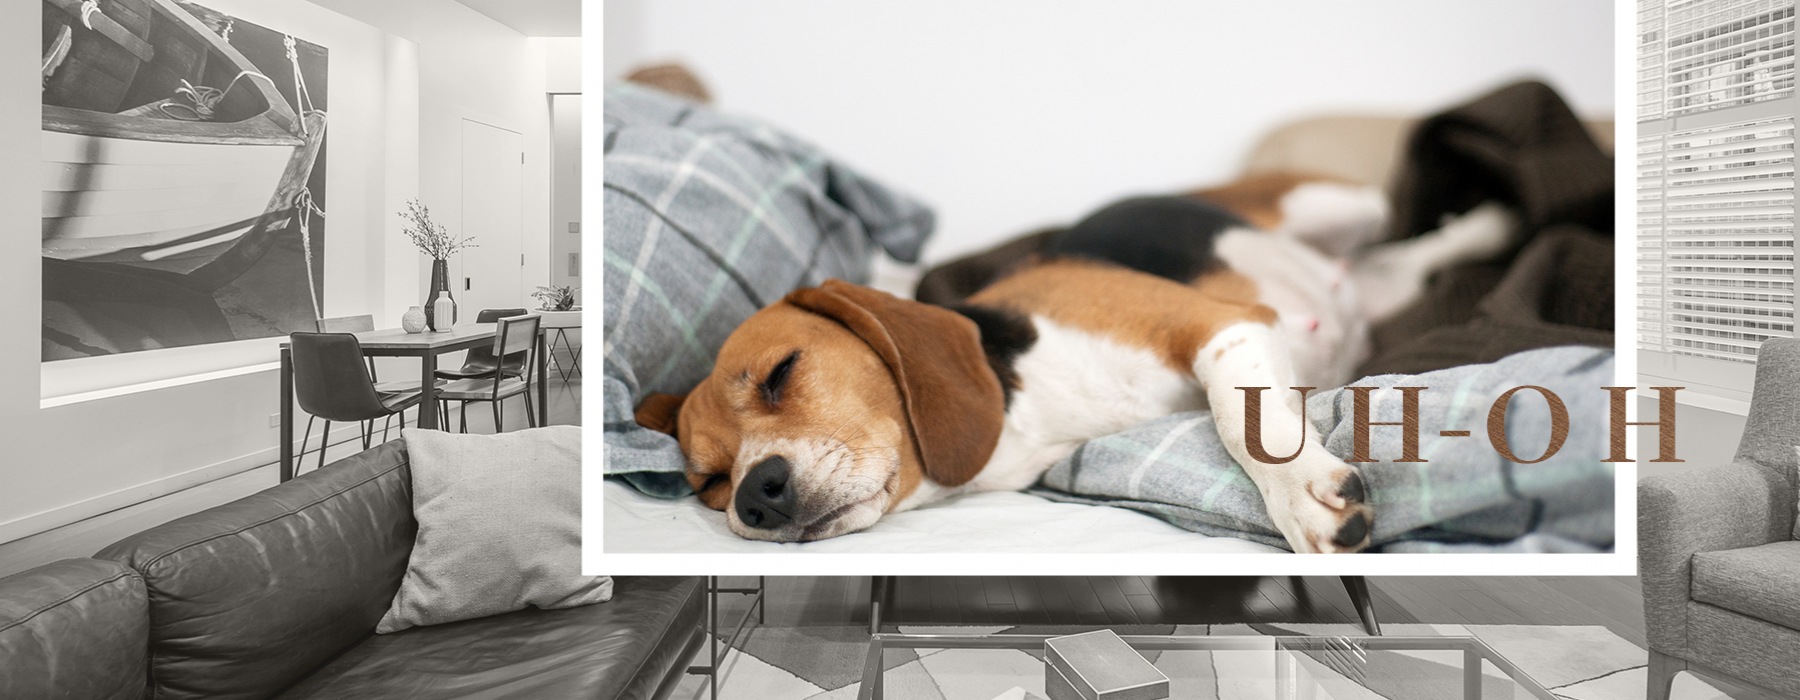 collage of dog sleeping on comfy bed with image of clubhouse interior in the background